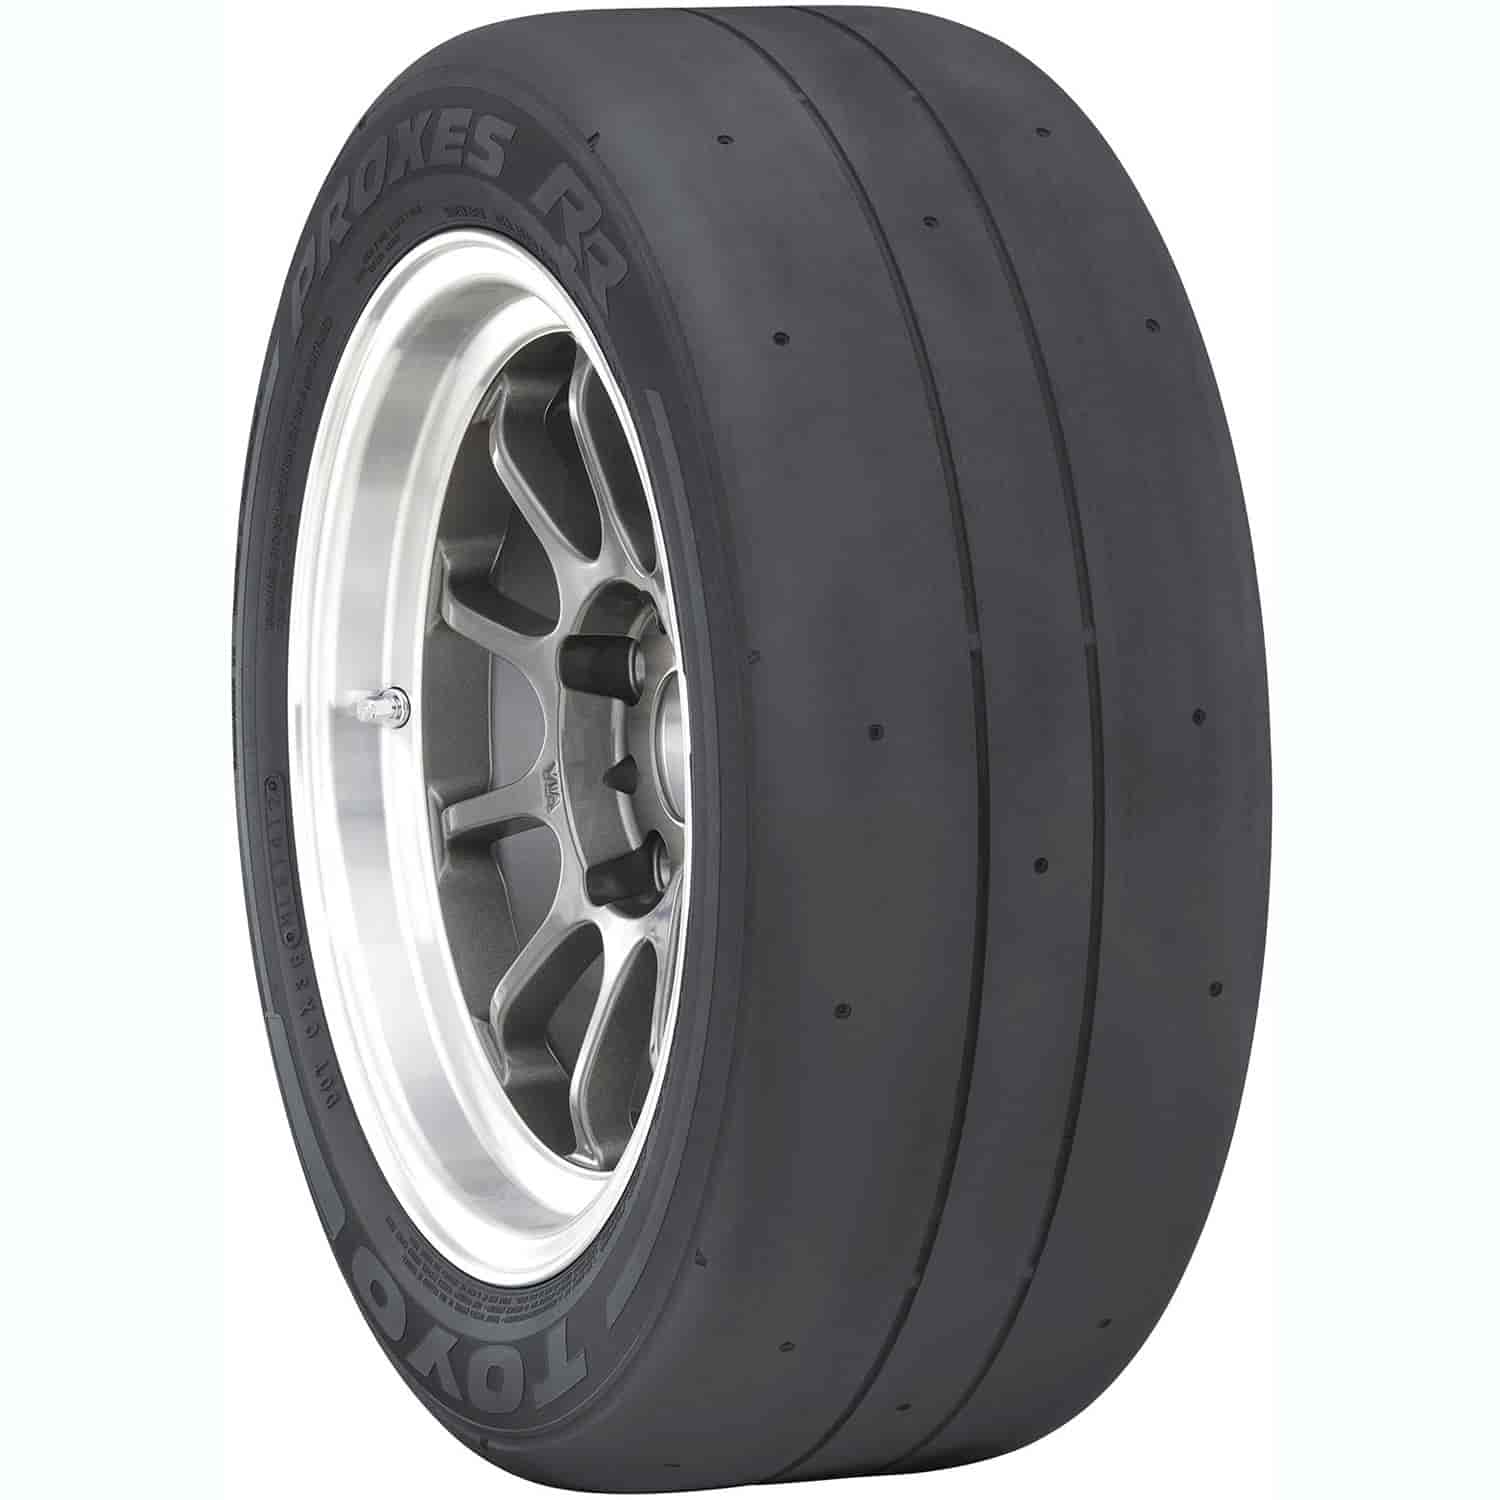 Proxes RR Competition Tire 205/60R13 86V